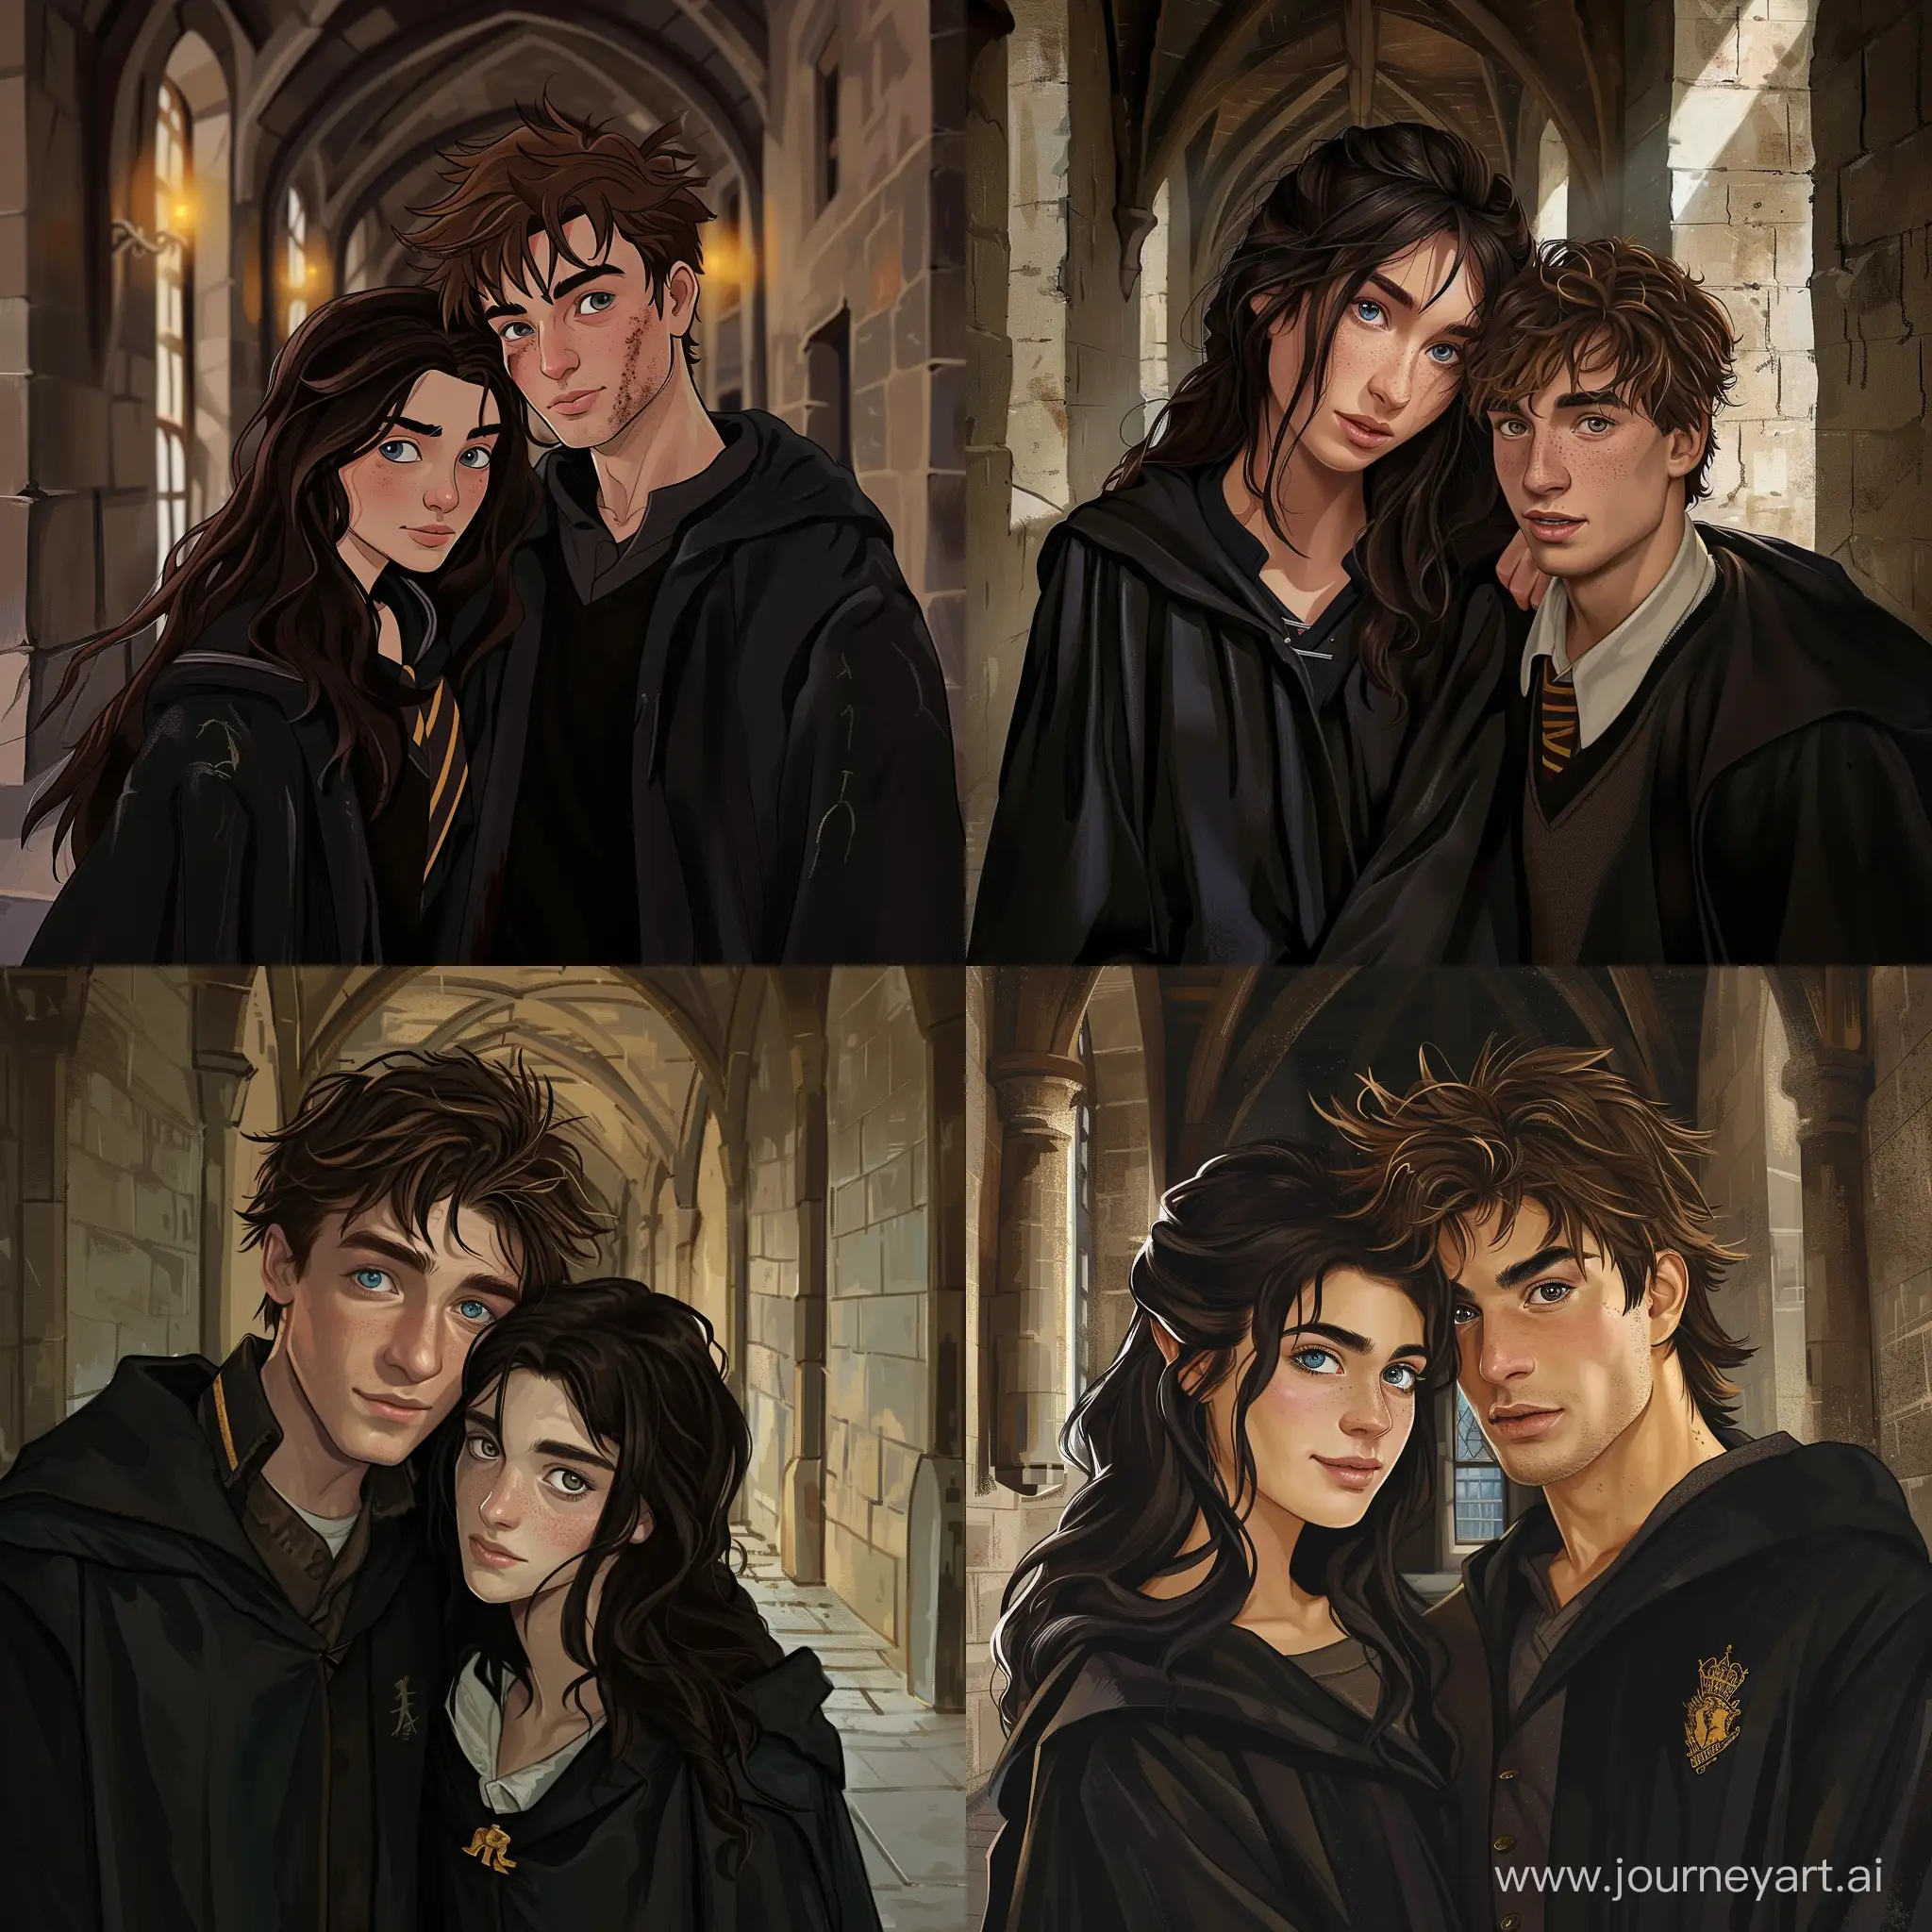 Friends, Hogwarts, Ravenclaw, teenagers, 14 years old, beautiful girl, dark brown hair, blue eyes, black robe, guy with disheveled straw-colored hair and brown eyes, black robe, castle corridor, girl leaning on a guy's shoulder, full height, high quality, high detail, cartoon art